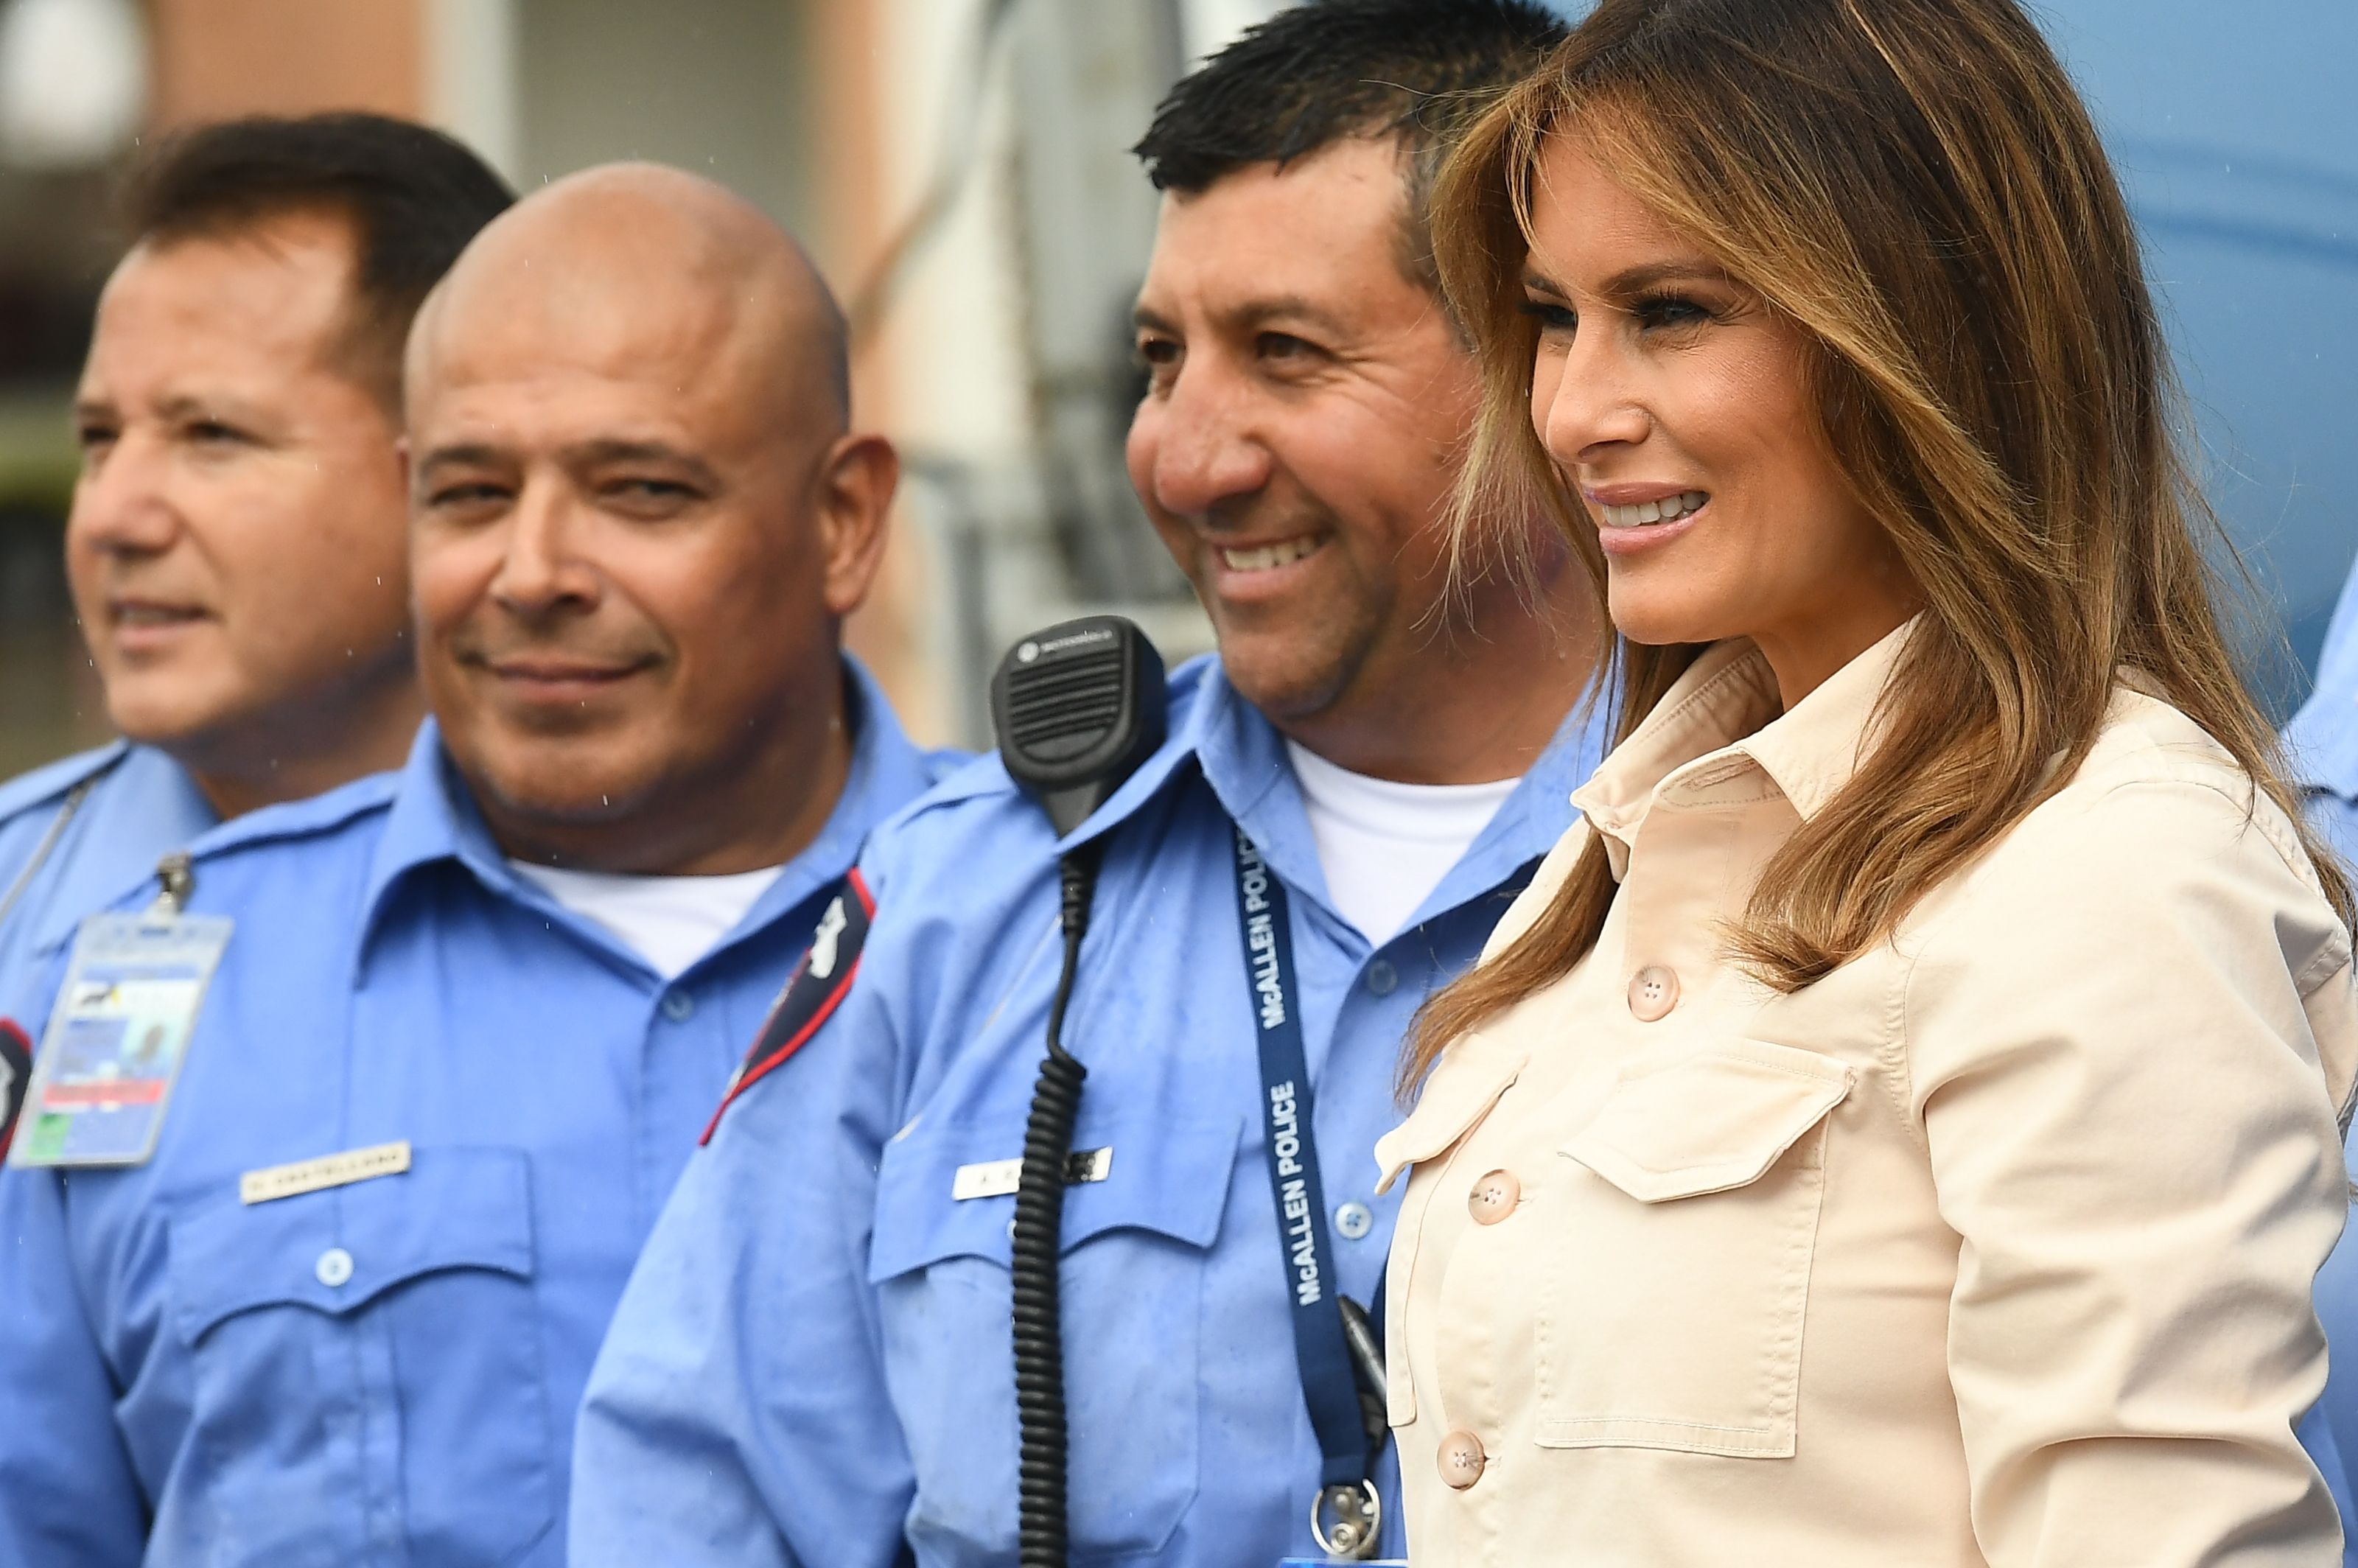 US First Lady Melania Trump poses with McAllen city police during a visit to the Luthern Social Services of the South's Upbring New Hope Children Center in McAllen, Texas on June 21, 2018. - First Lady Melania Trump made a surprise visit to the US-Mexican border on Thursday, June 21, 2018 as her husband's administration seeks to quell a firestorm over migrant family separations. President Donald Trump first announced the trip by his wife, who will tour a non-profit social services center for migrant children, as well as a customs and border patrol processing center, according to a statement from her office. (Photo by MANDEL NGAN / AFP) (Photo credit should read MANDEL NGAN/AFP via Getty Images)